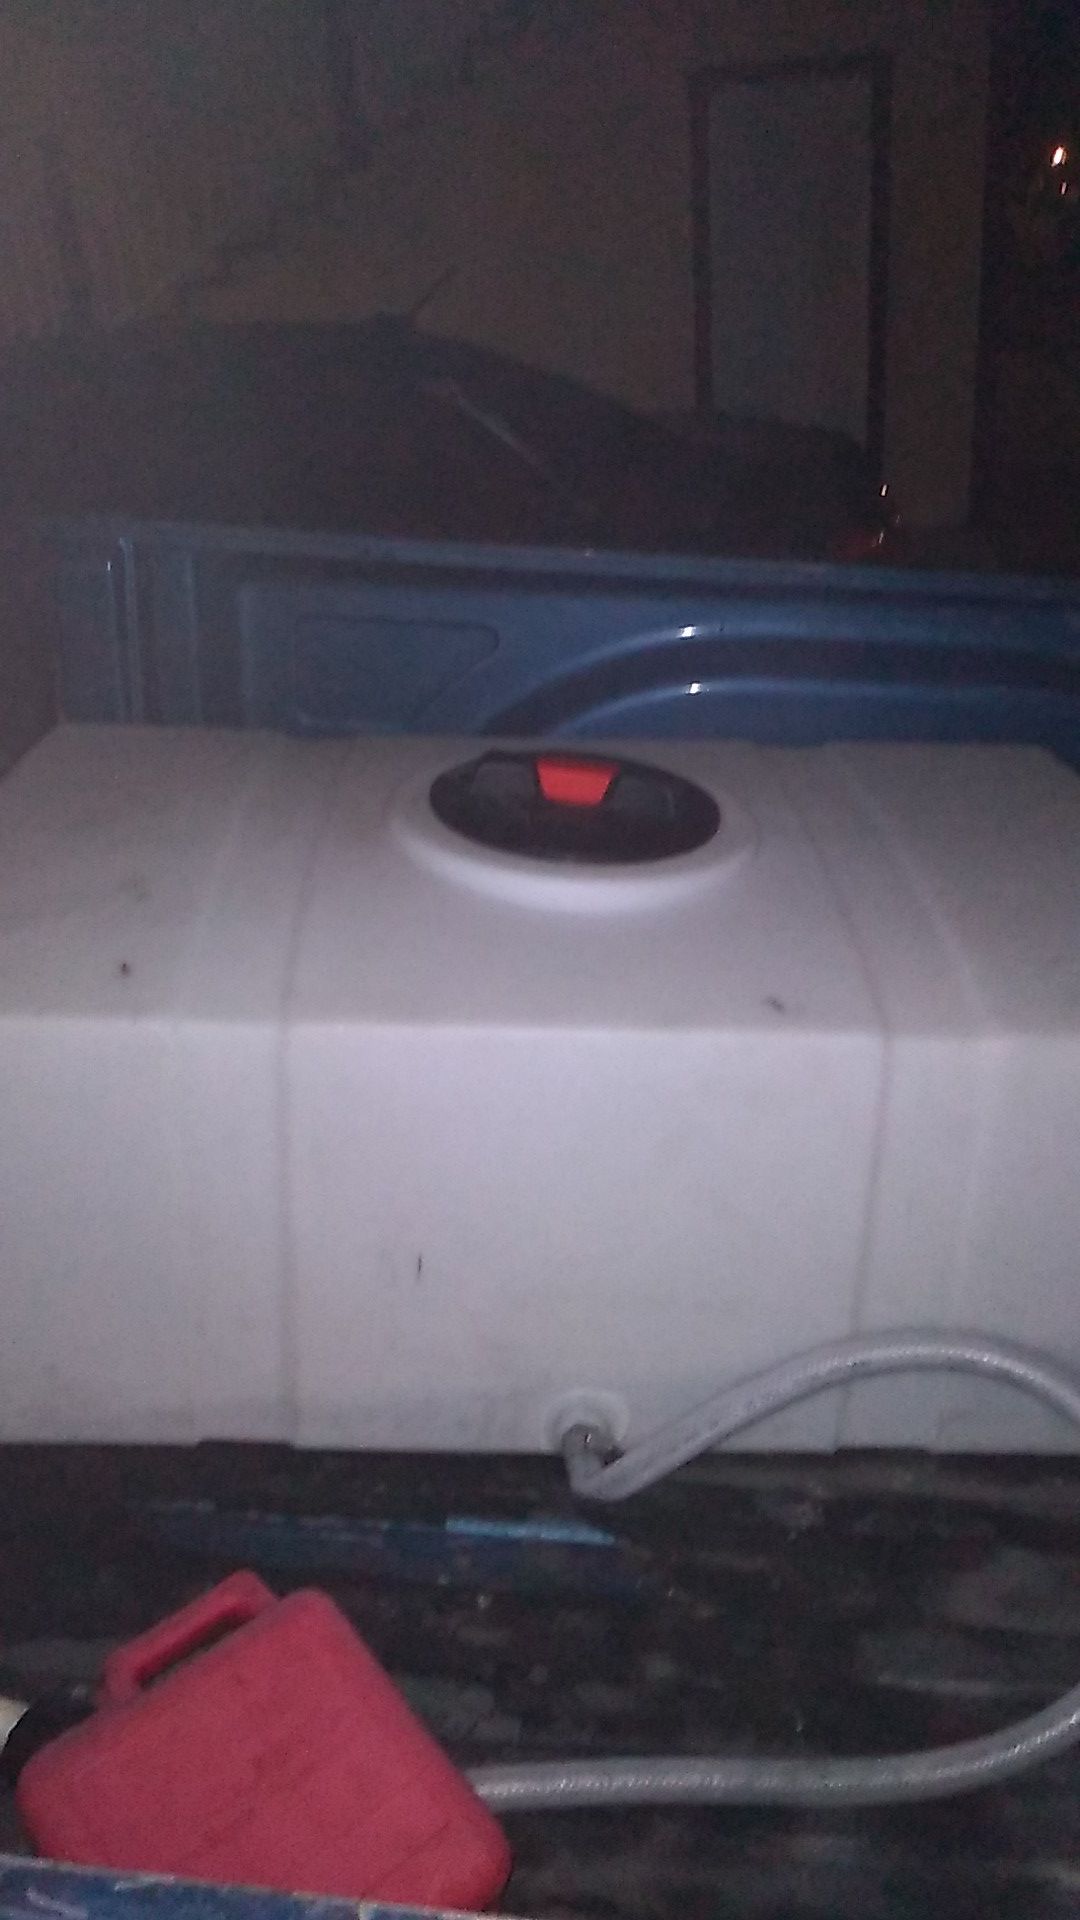 60 gallon water tank new just dirty asking $120 need it gone asap